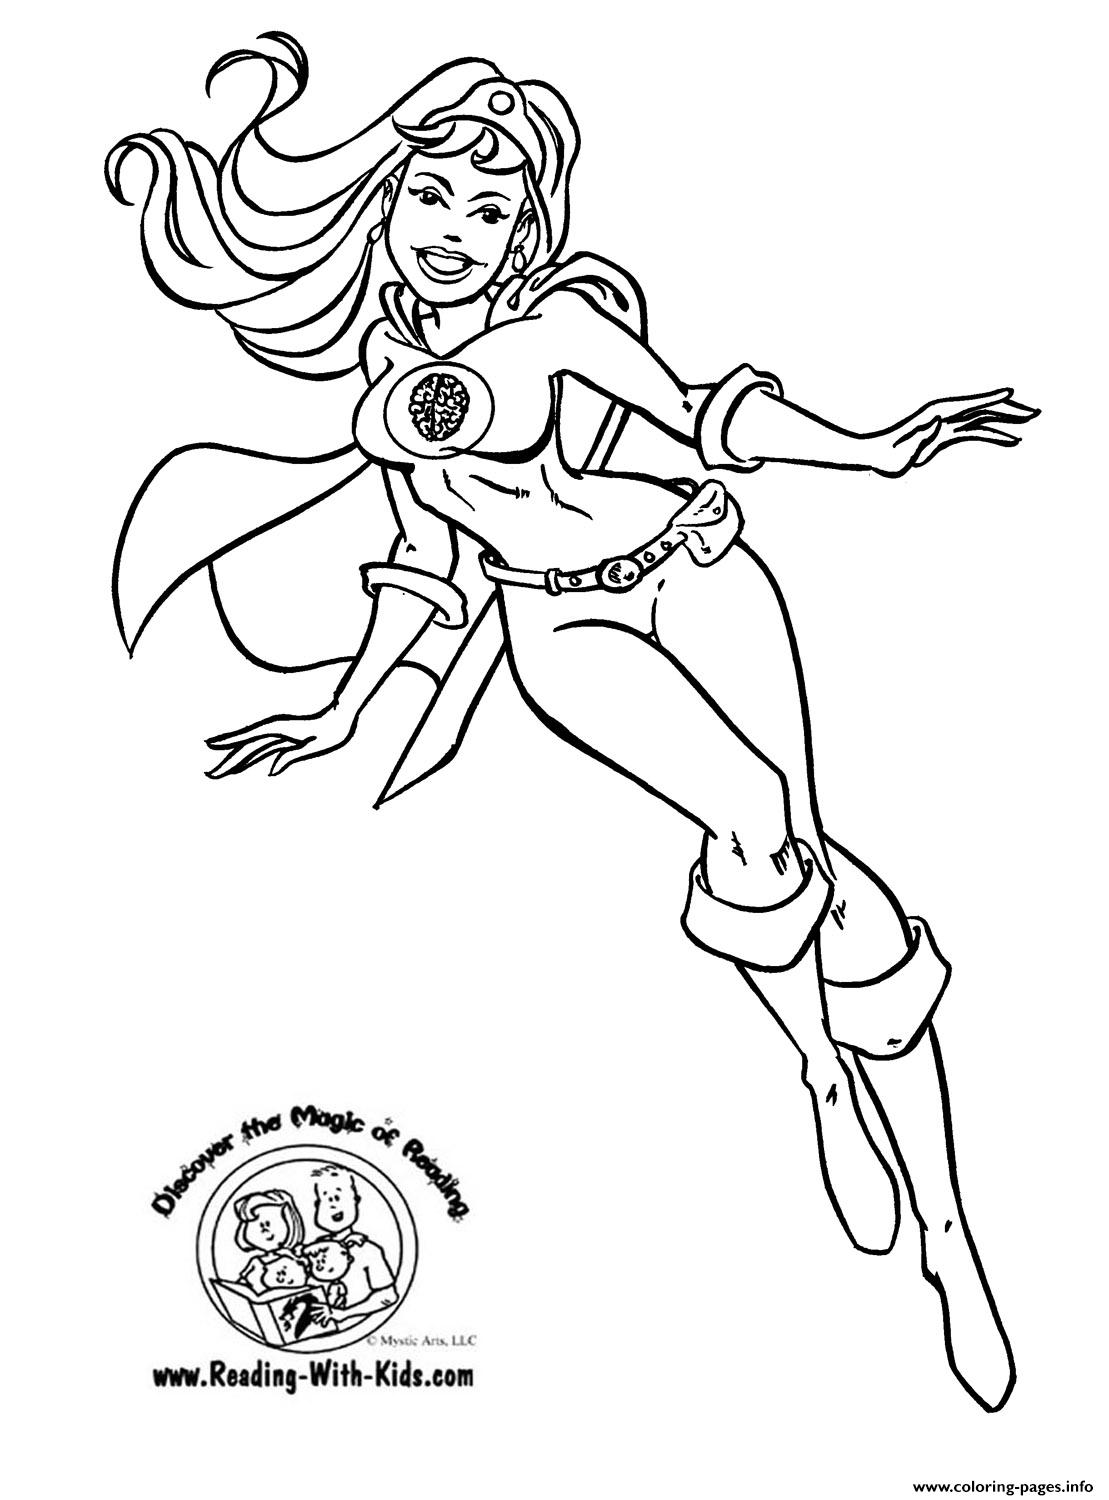 Supergirl coloring page printable